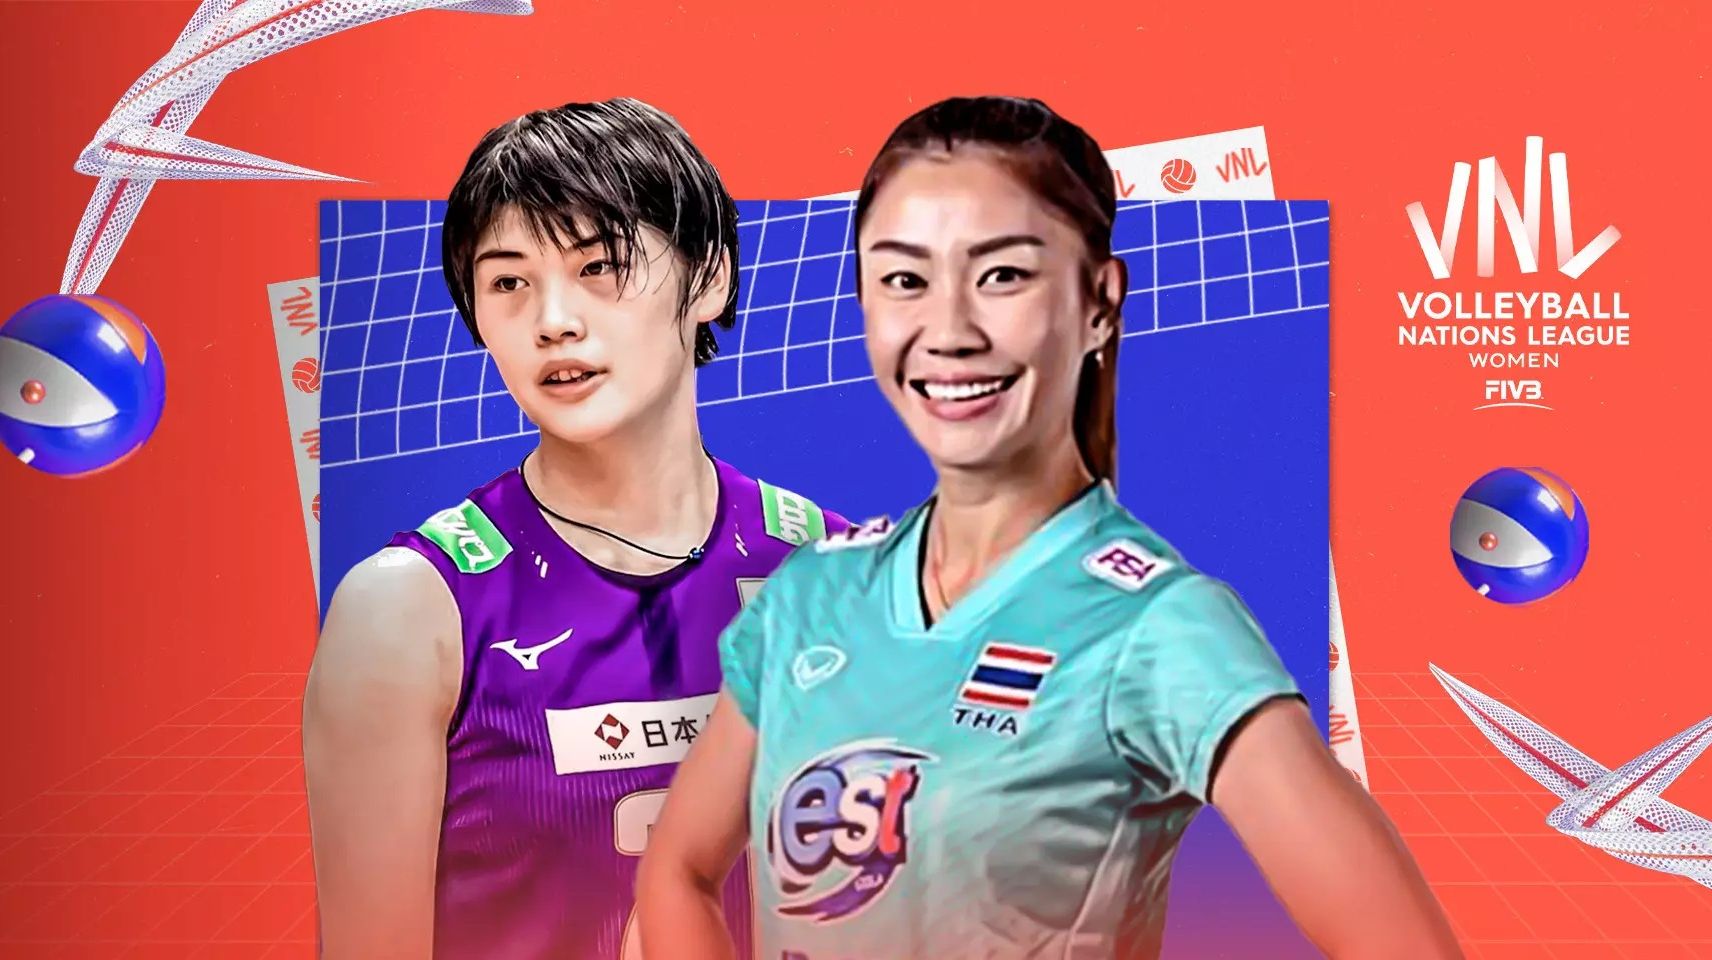 Jepang vs Thailand-Volleyball Nations League 2022 Duel Derby Asia, Berikut Link Live Streaming